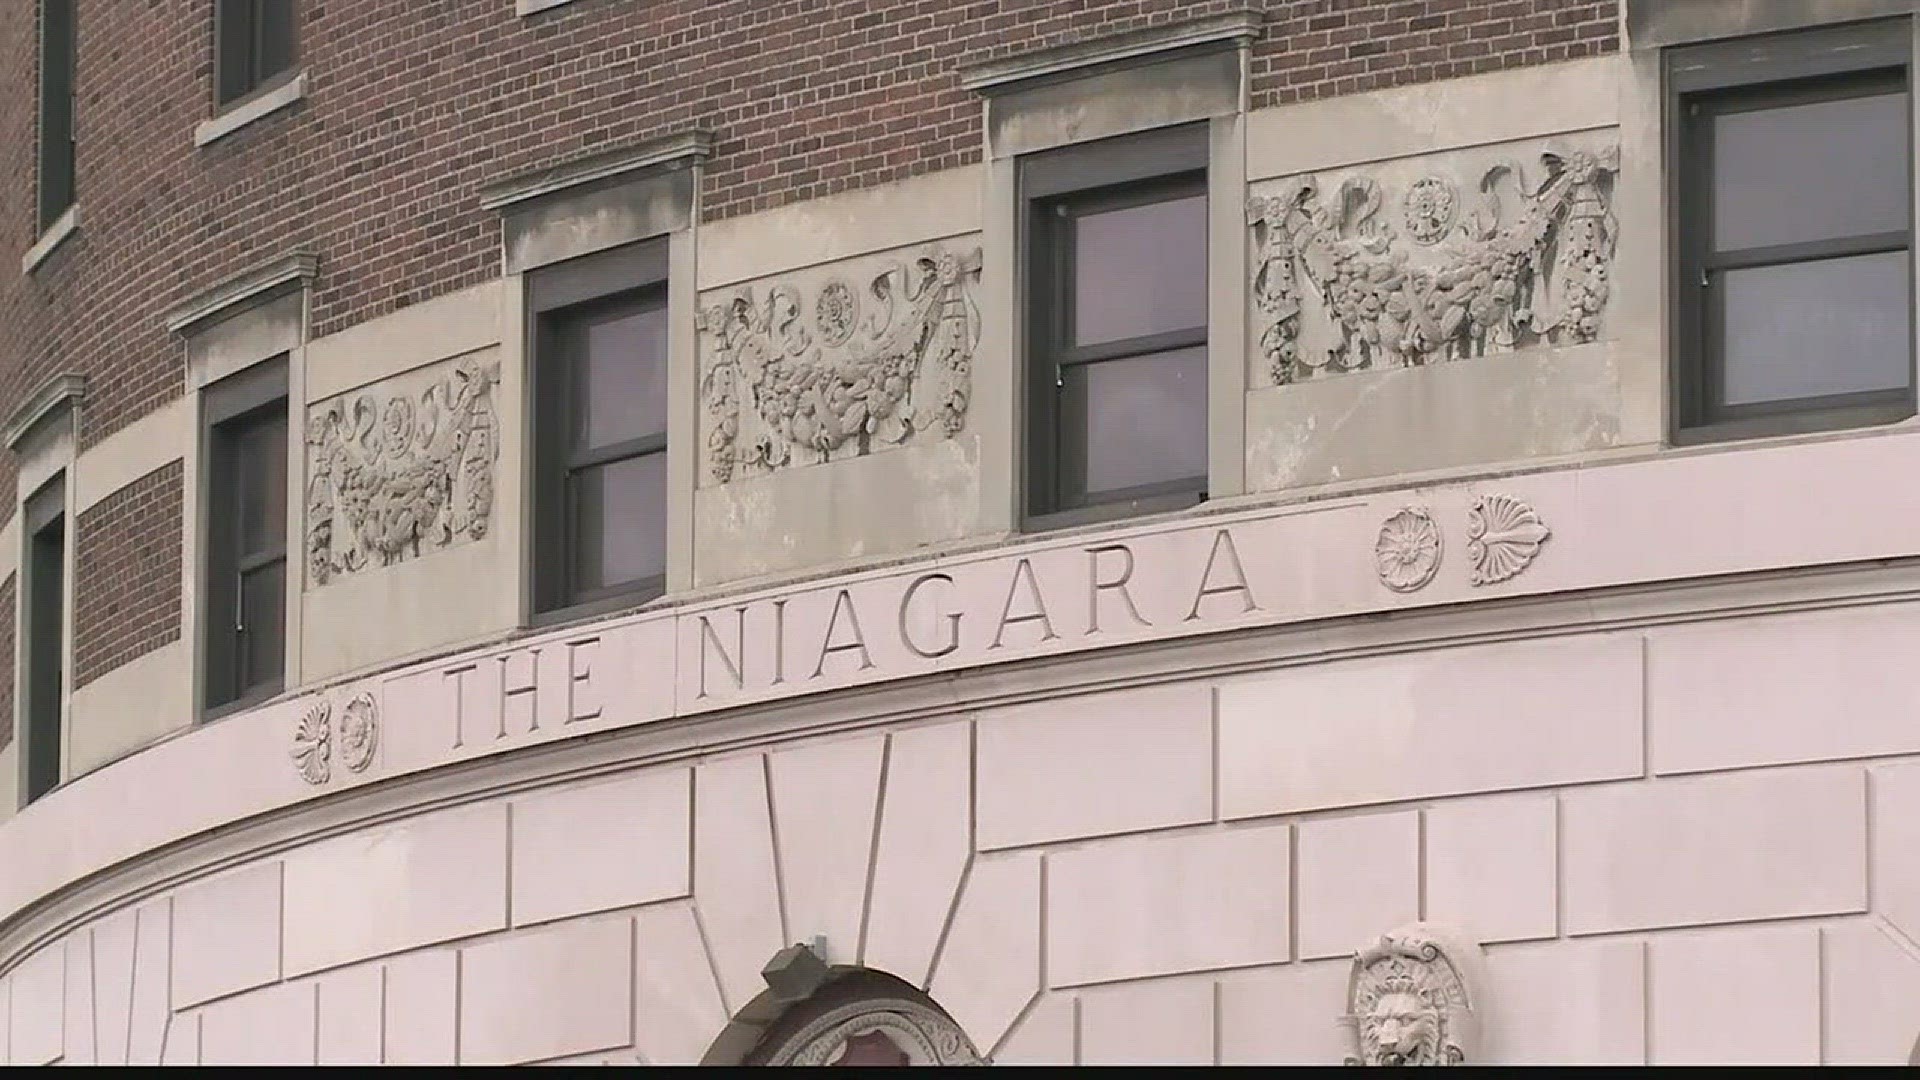 Governor expected to reveal Hotel Niagara plan